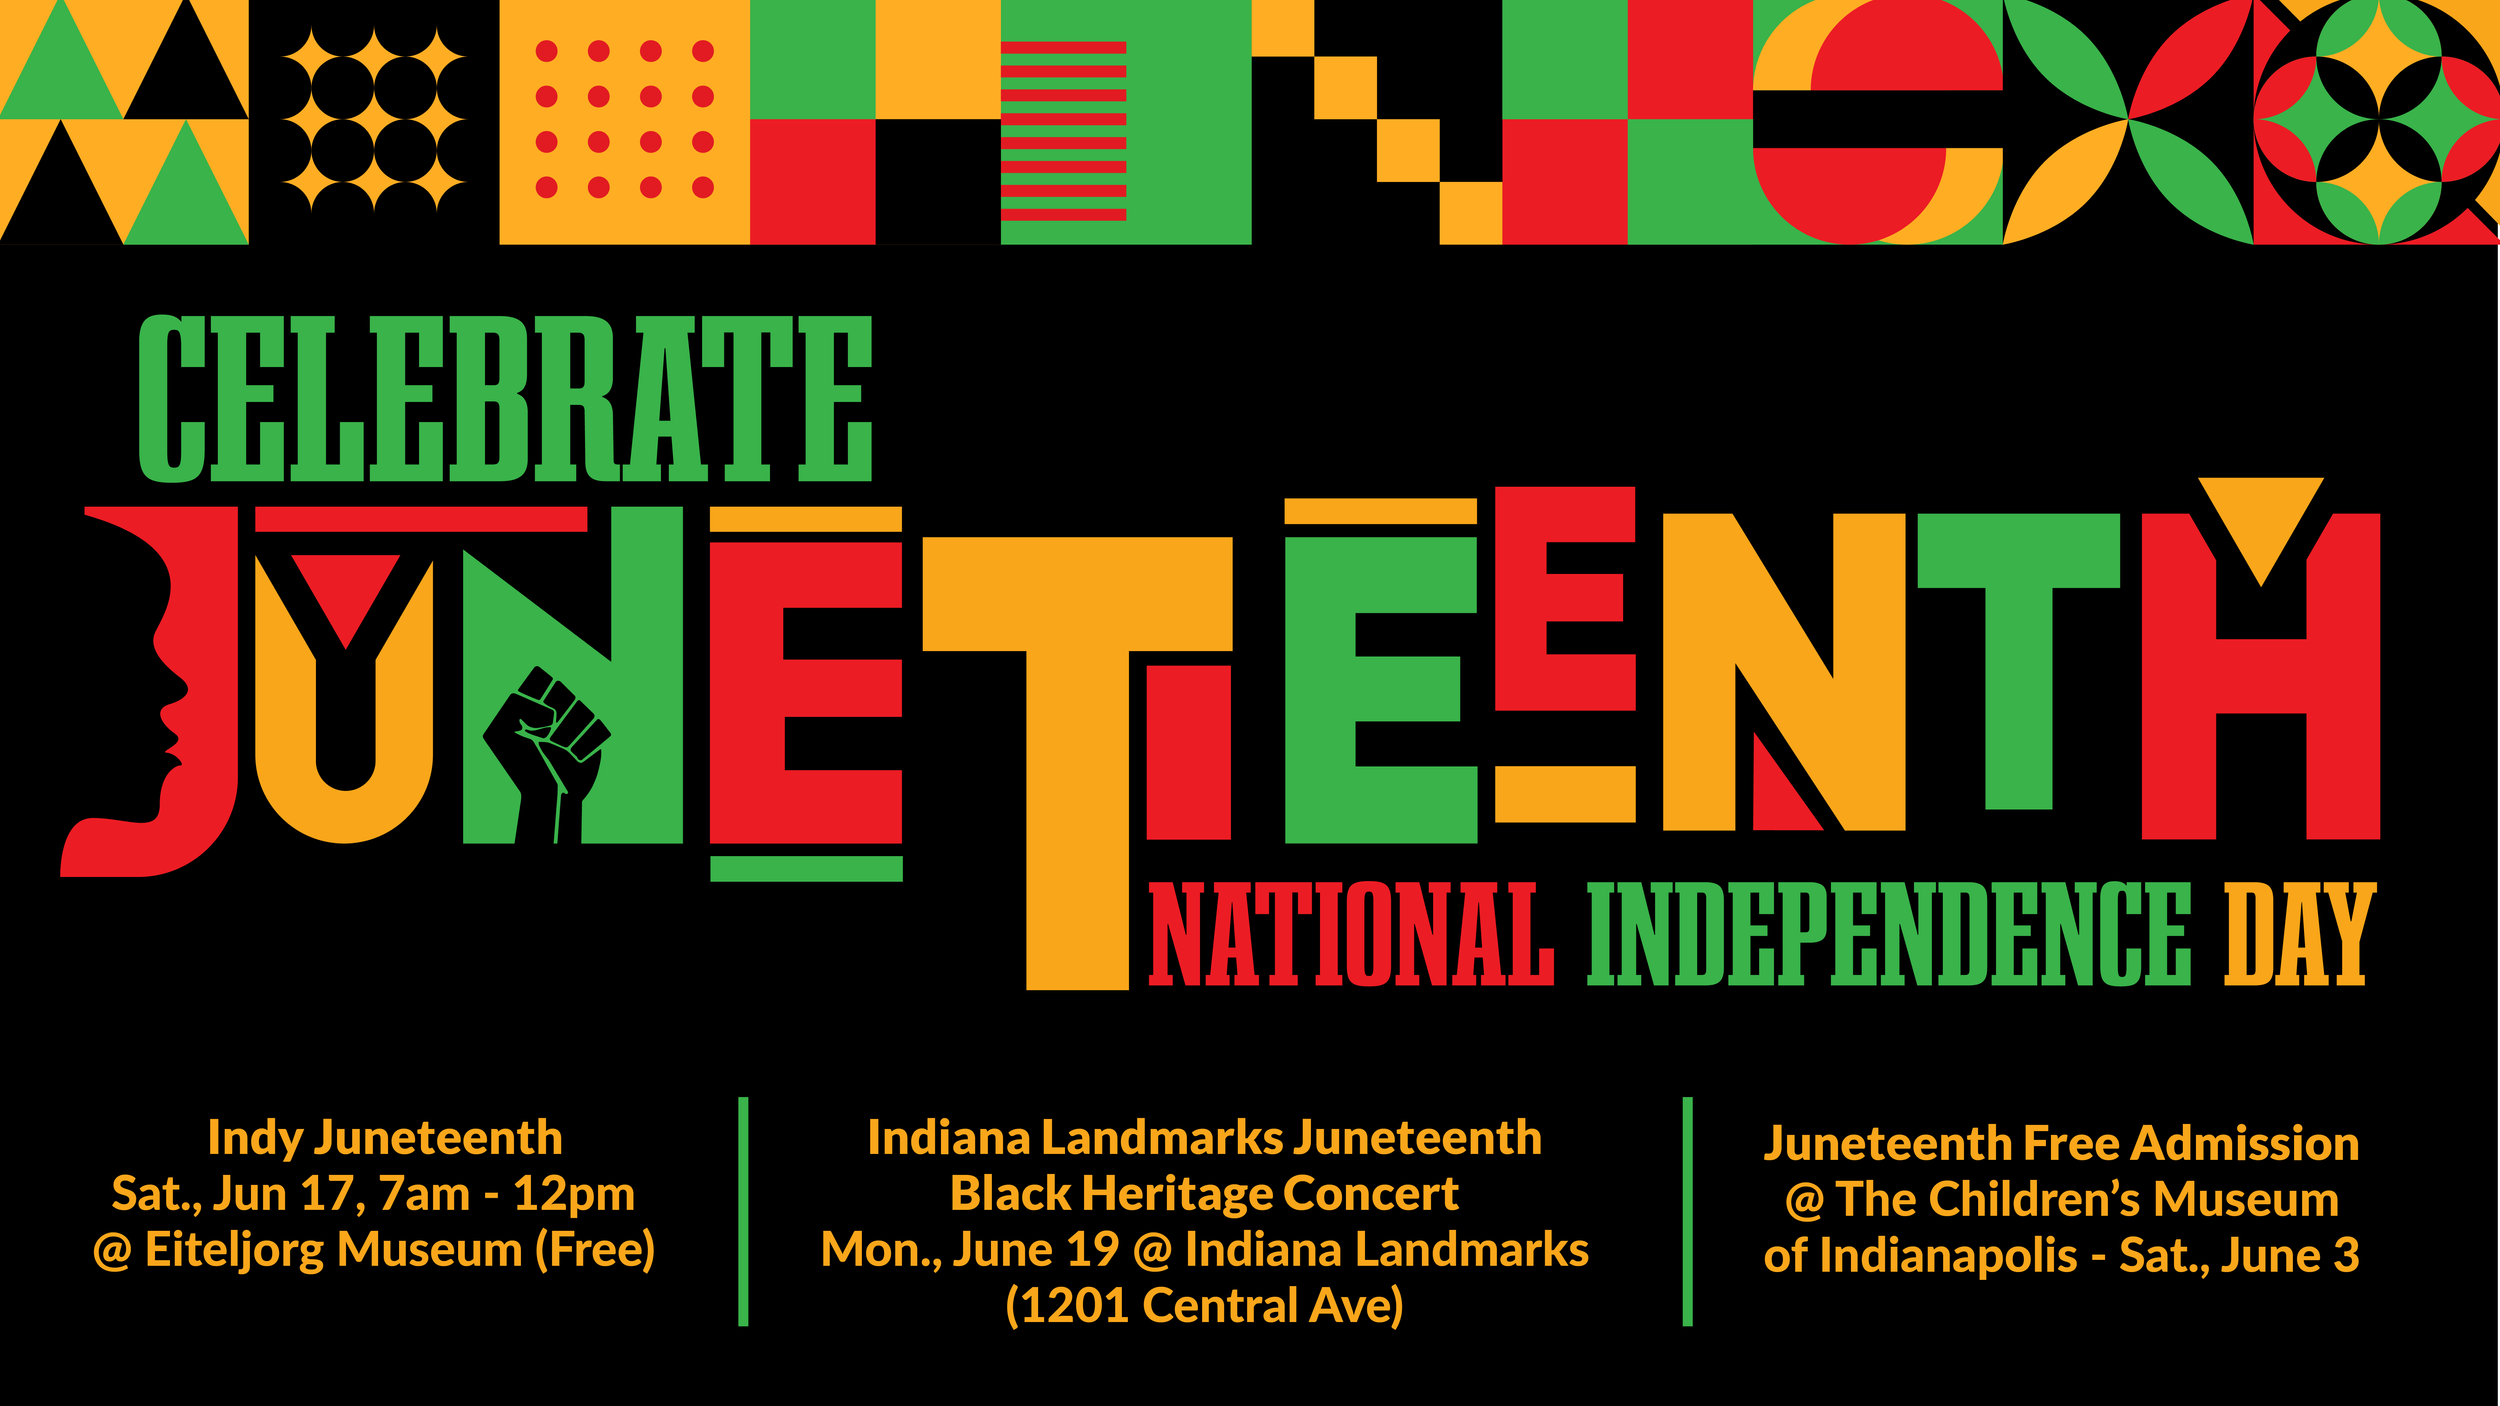 Juneteenth National Independence Day